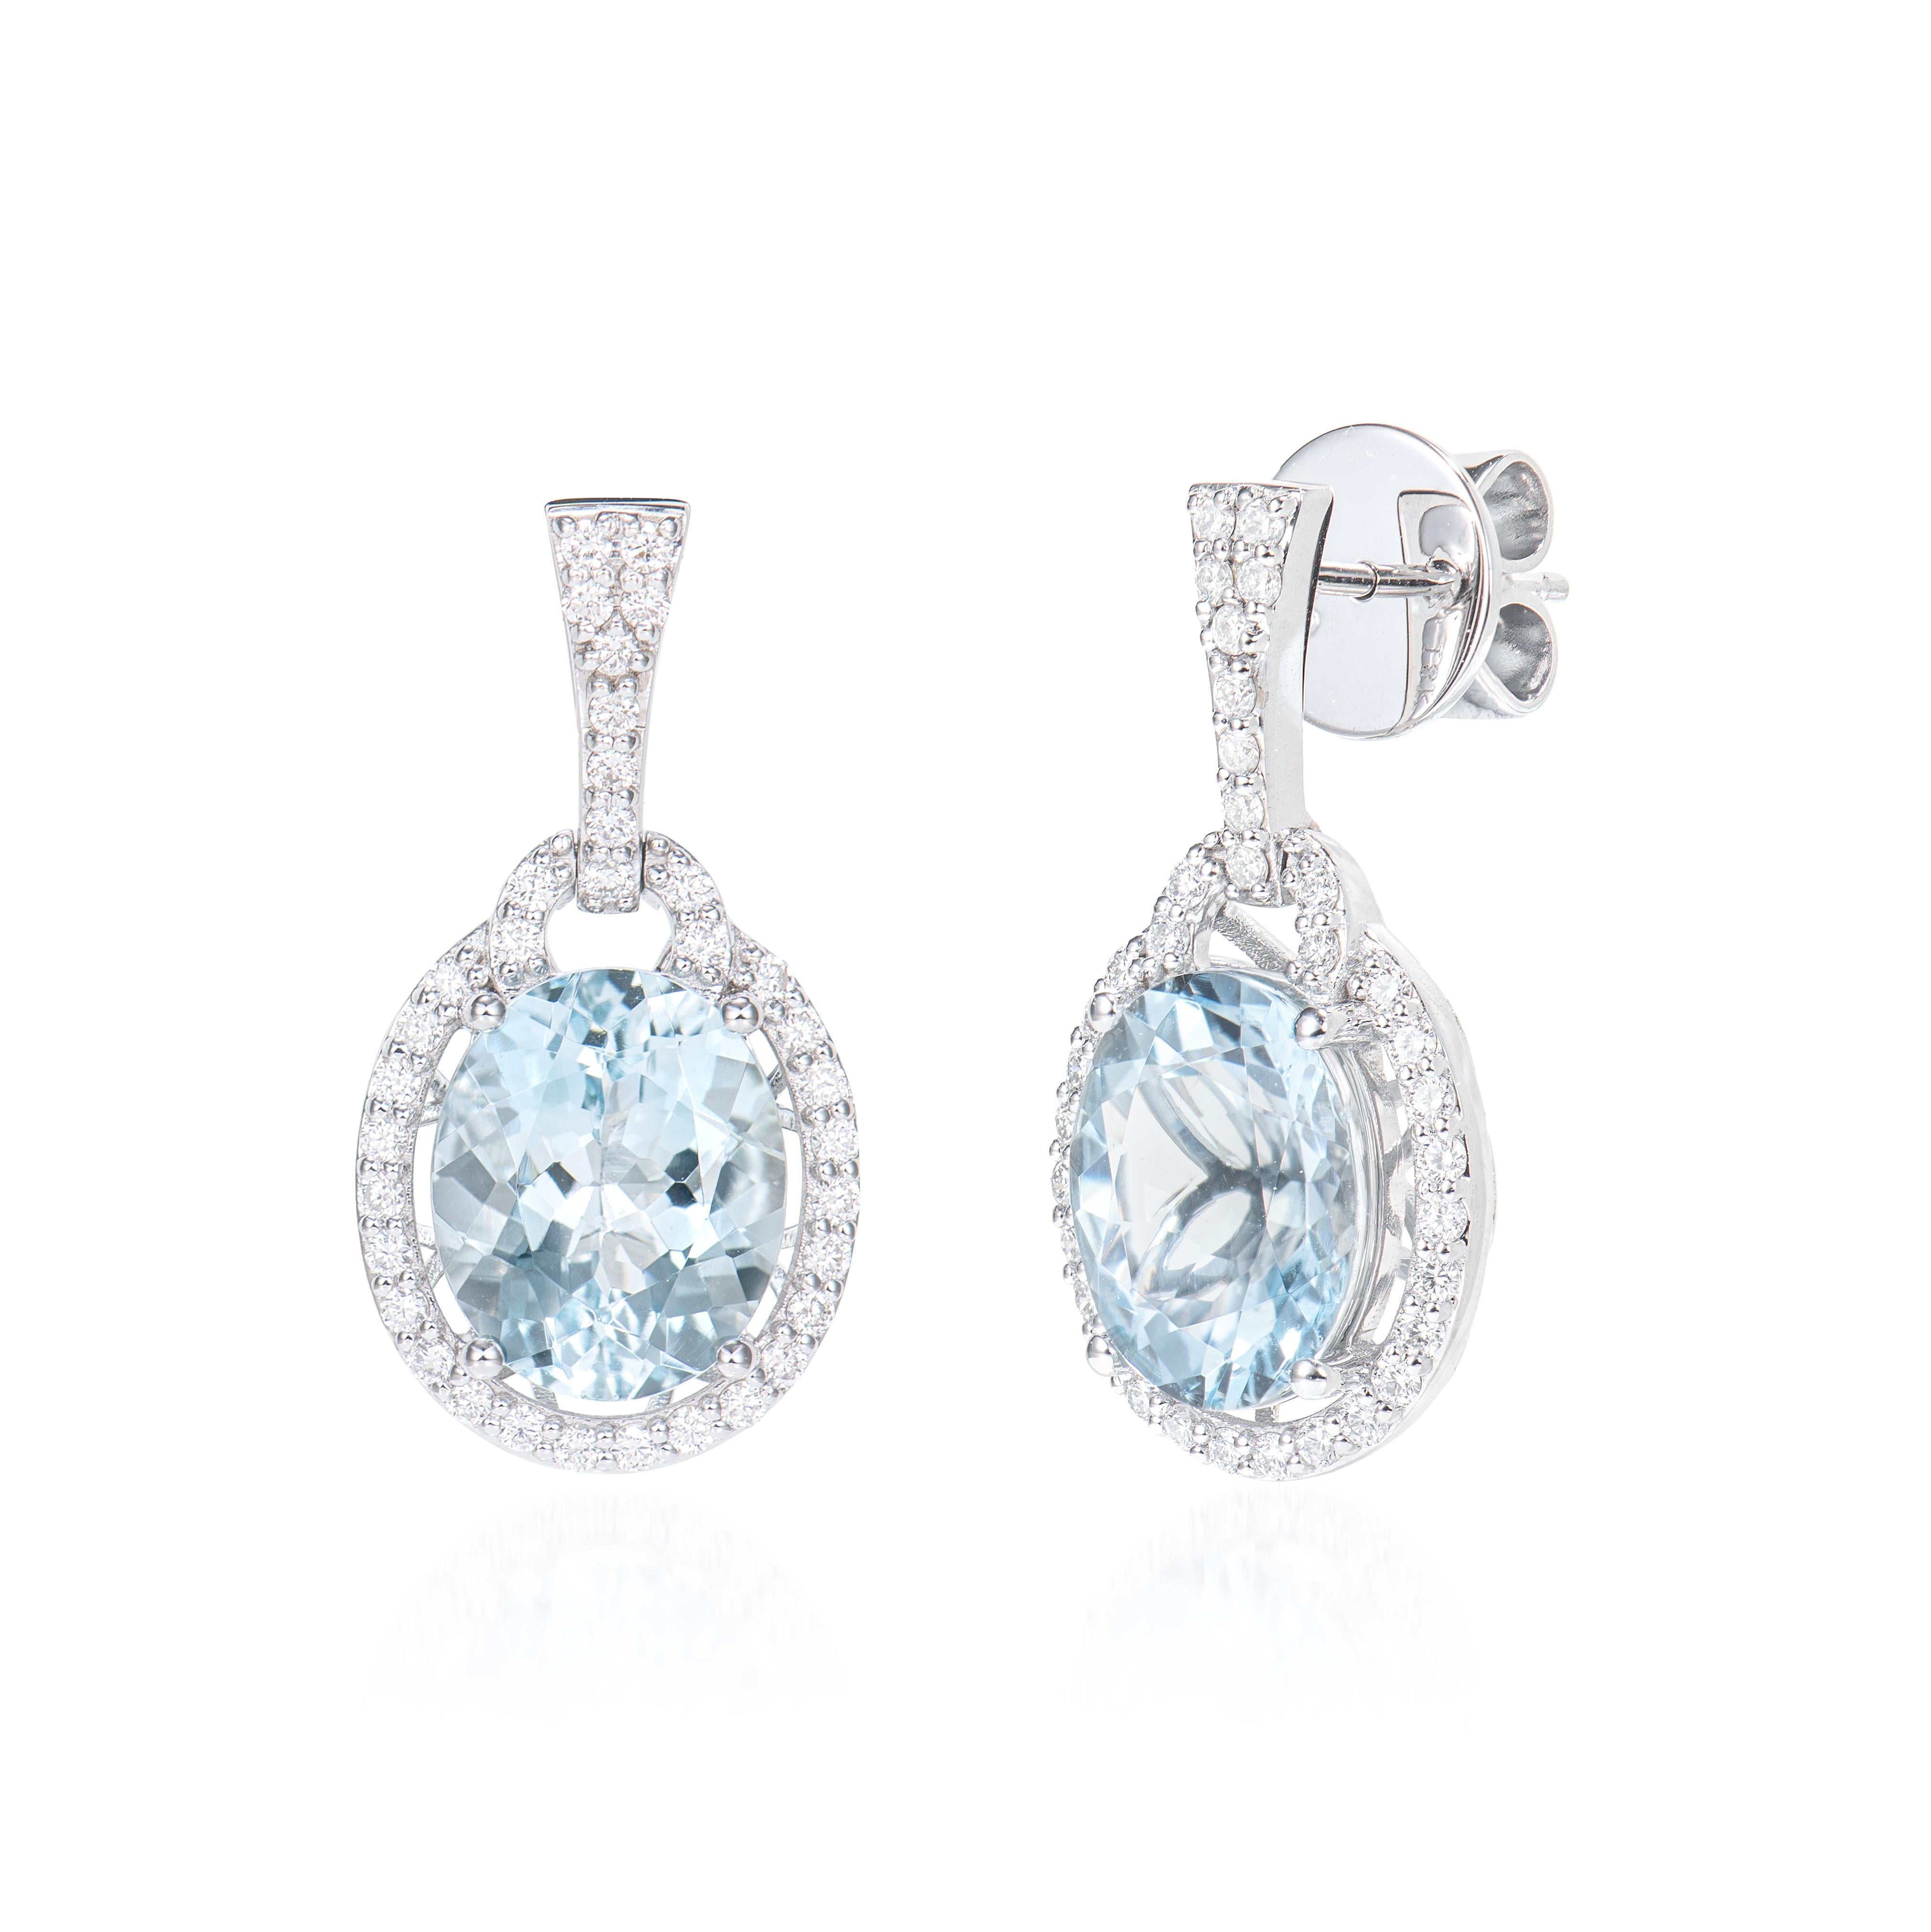 Oval Cut 6.38 Carat Aquamarine Drop Earrings in 18Karat White Gold with Diamond For Sale